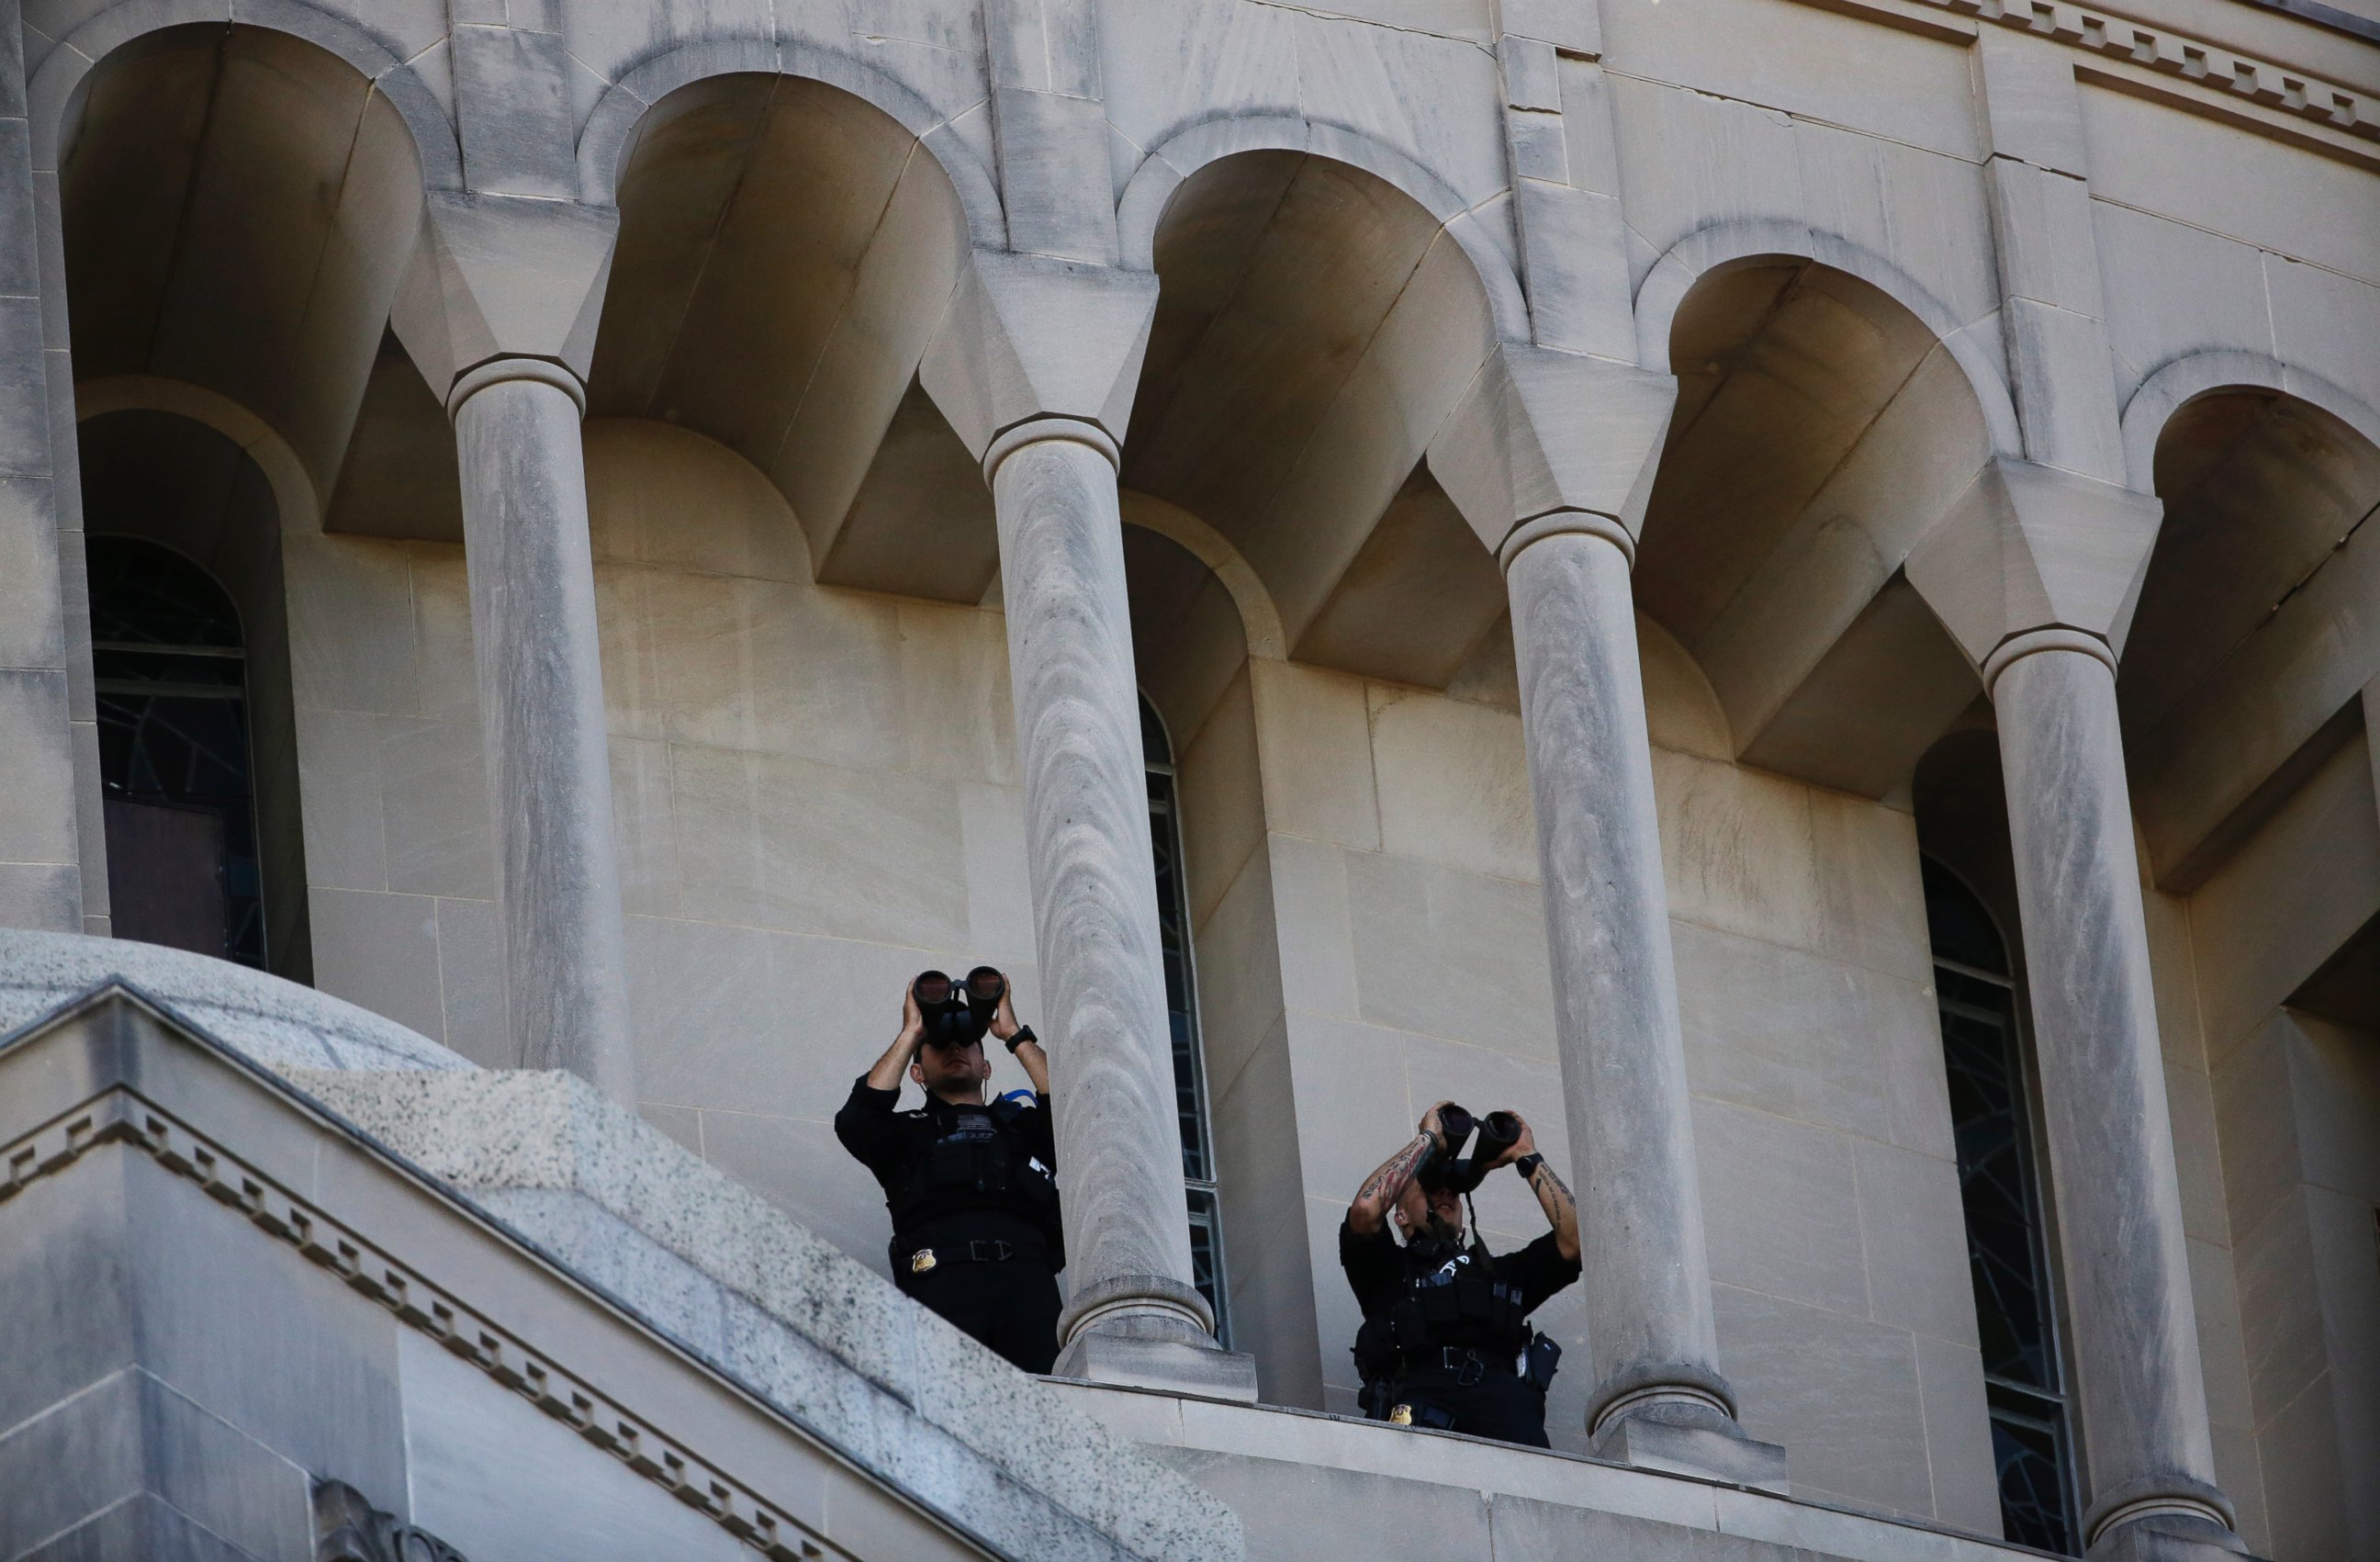 PHOTO: Security personnel look through binoculars during a Mass conducted by Pope Francis outside the Basilica of the National Shrine of the Immaculate Conception, Sept. 23, 2015, in Washington.